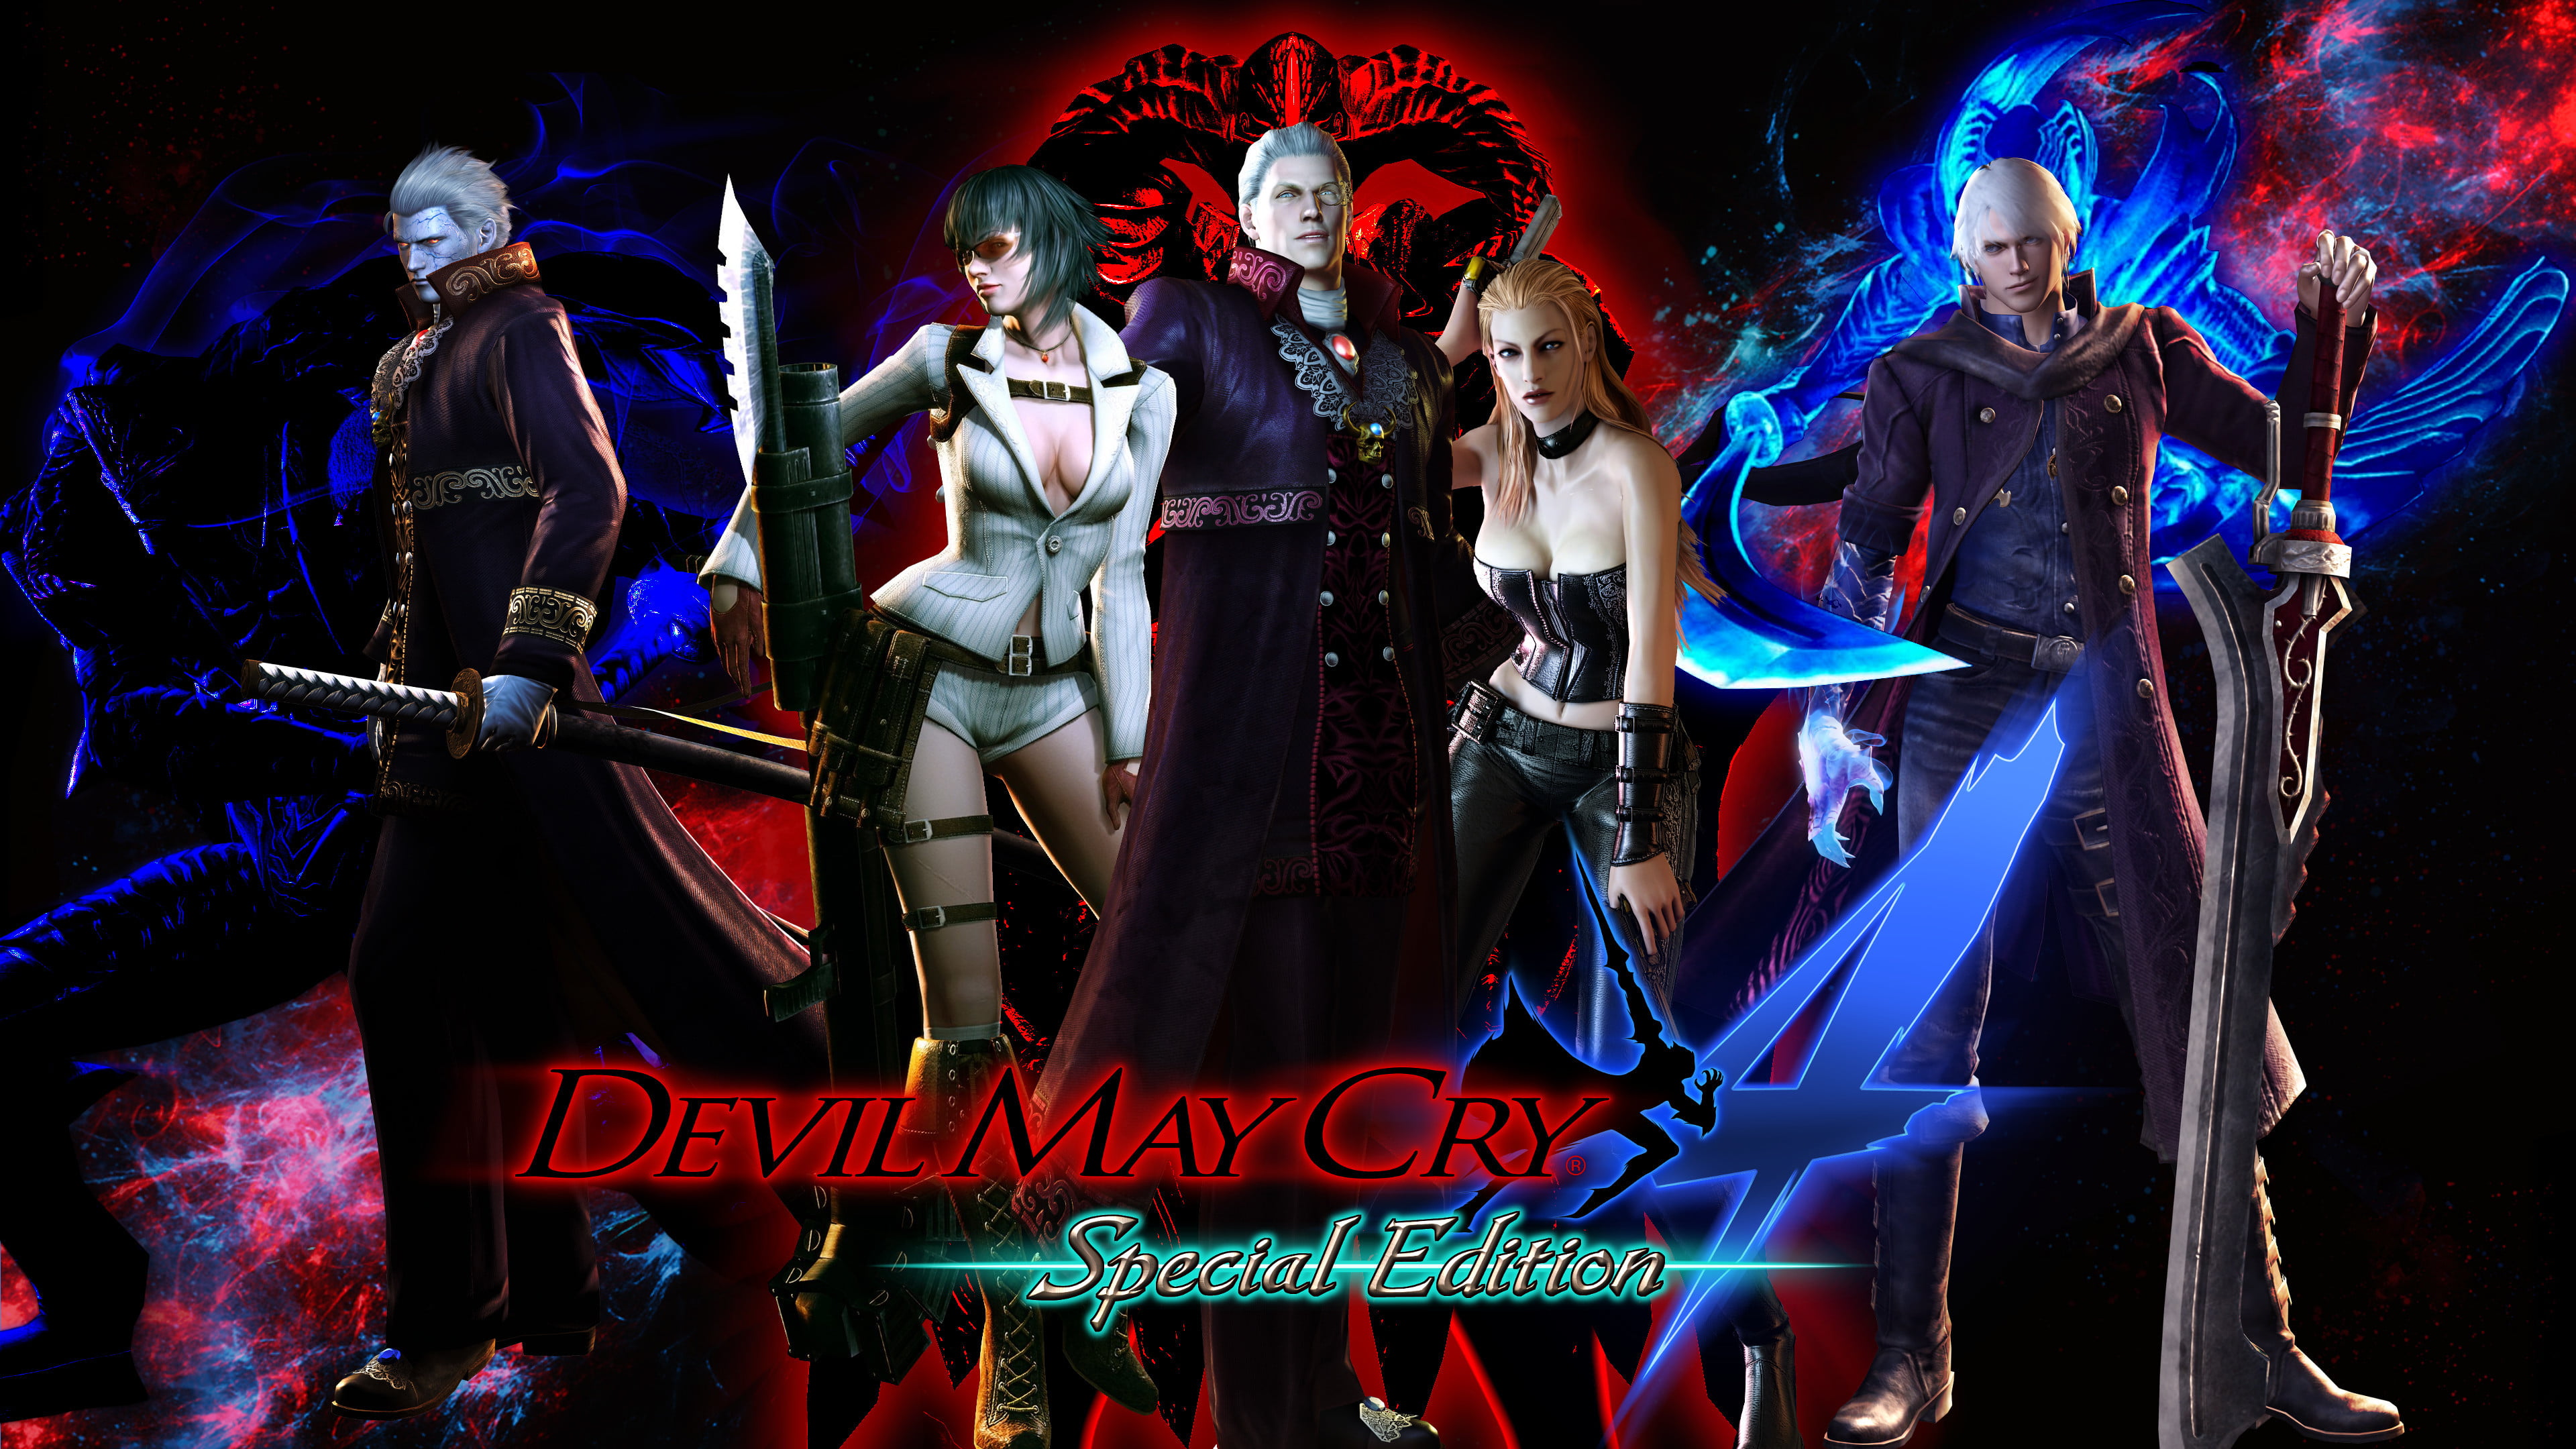 Devil May Cry 4 Special Edition Wallpaper Hd - HD Wallpaper 